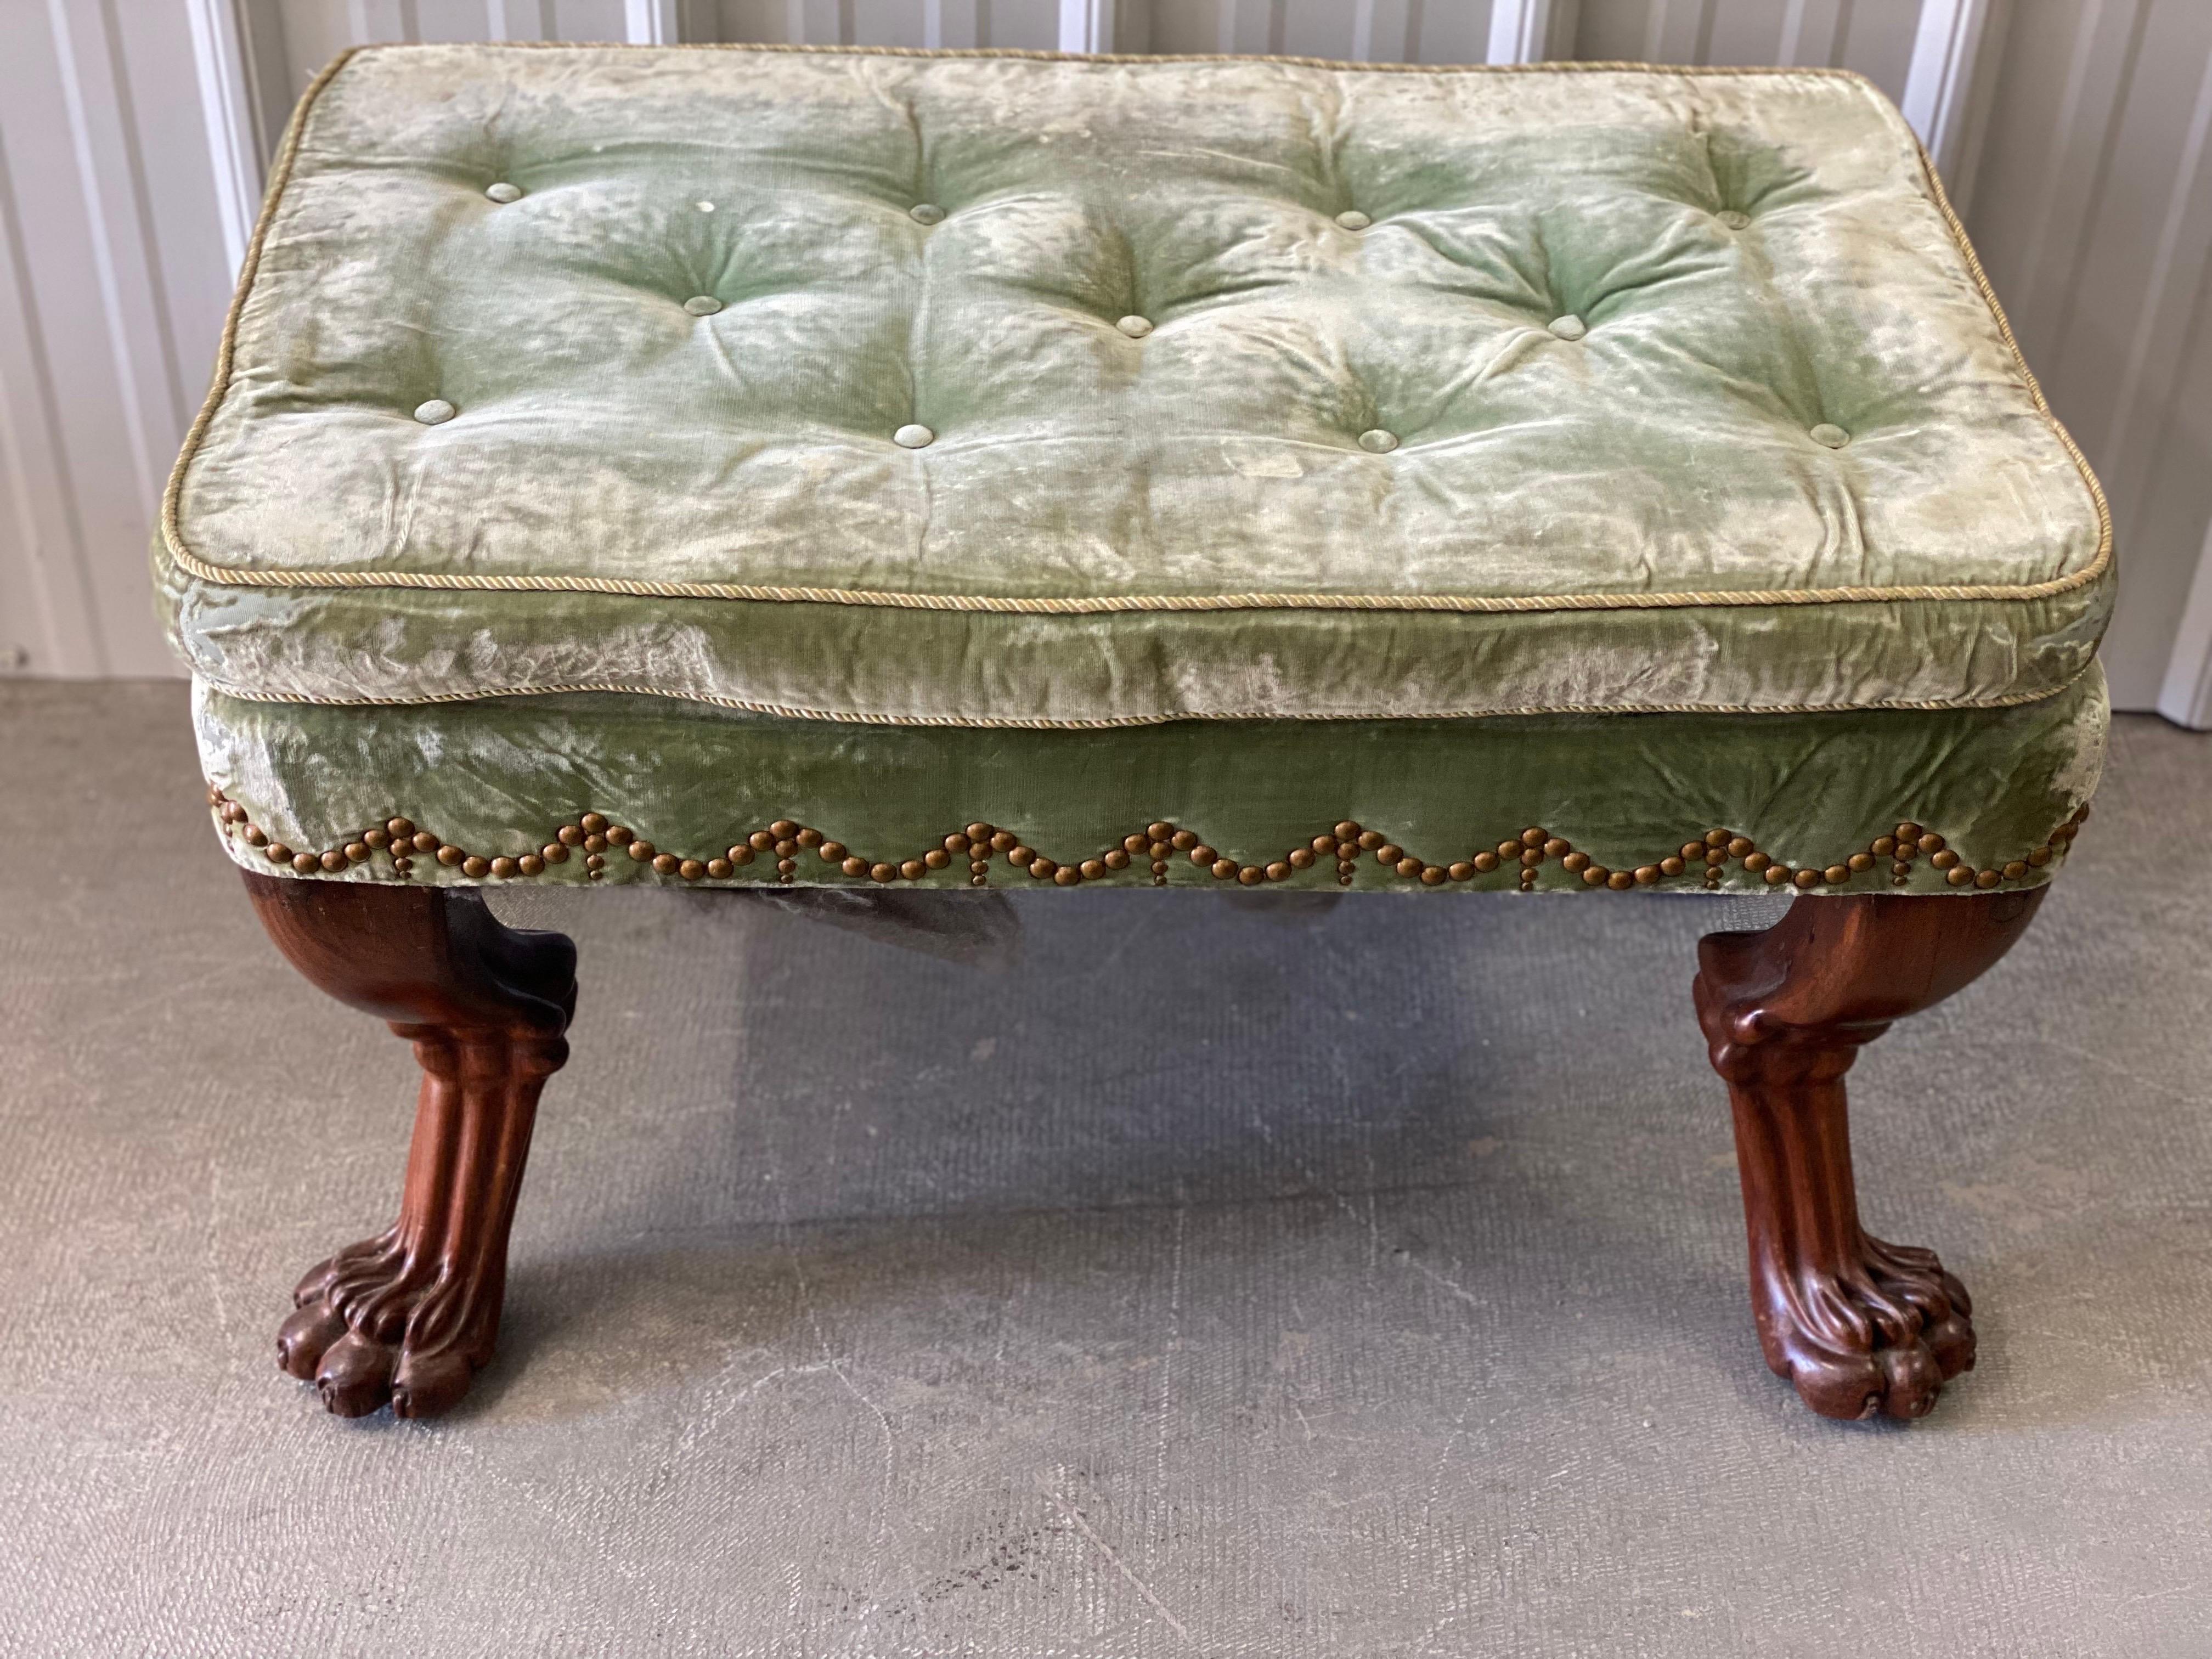 18th Century English Mahogany Clawfoot Stool in Velvet with Nailheads For Sale 3